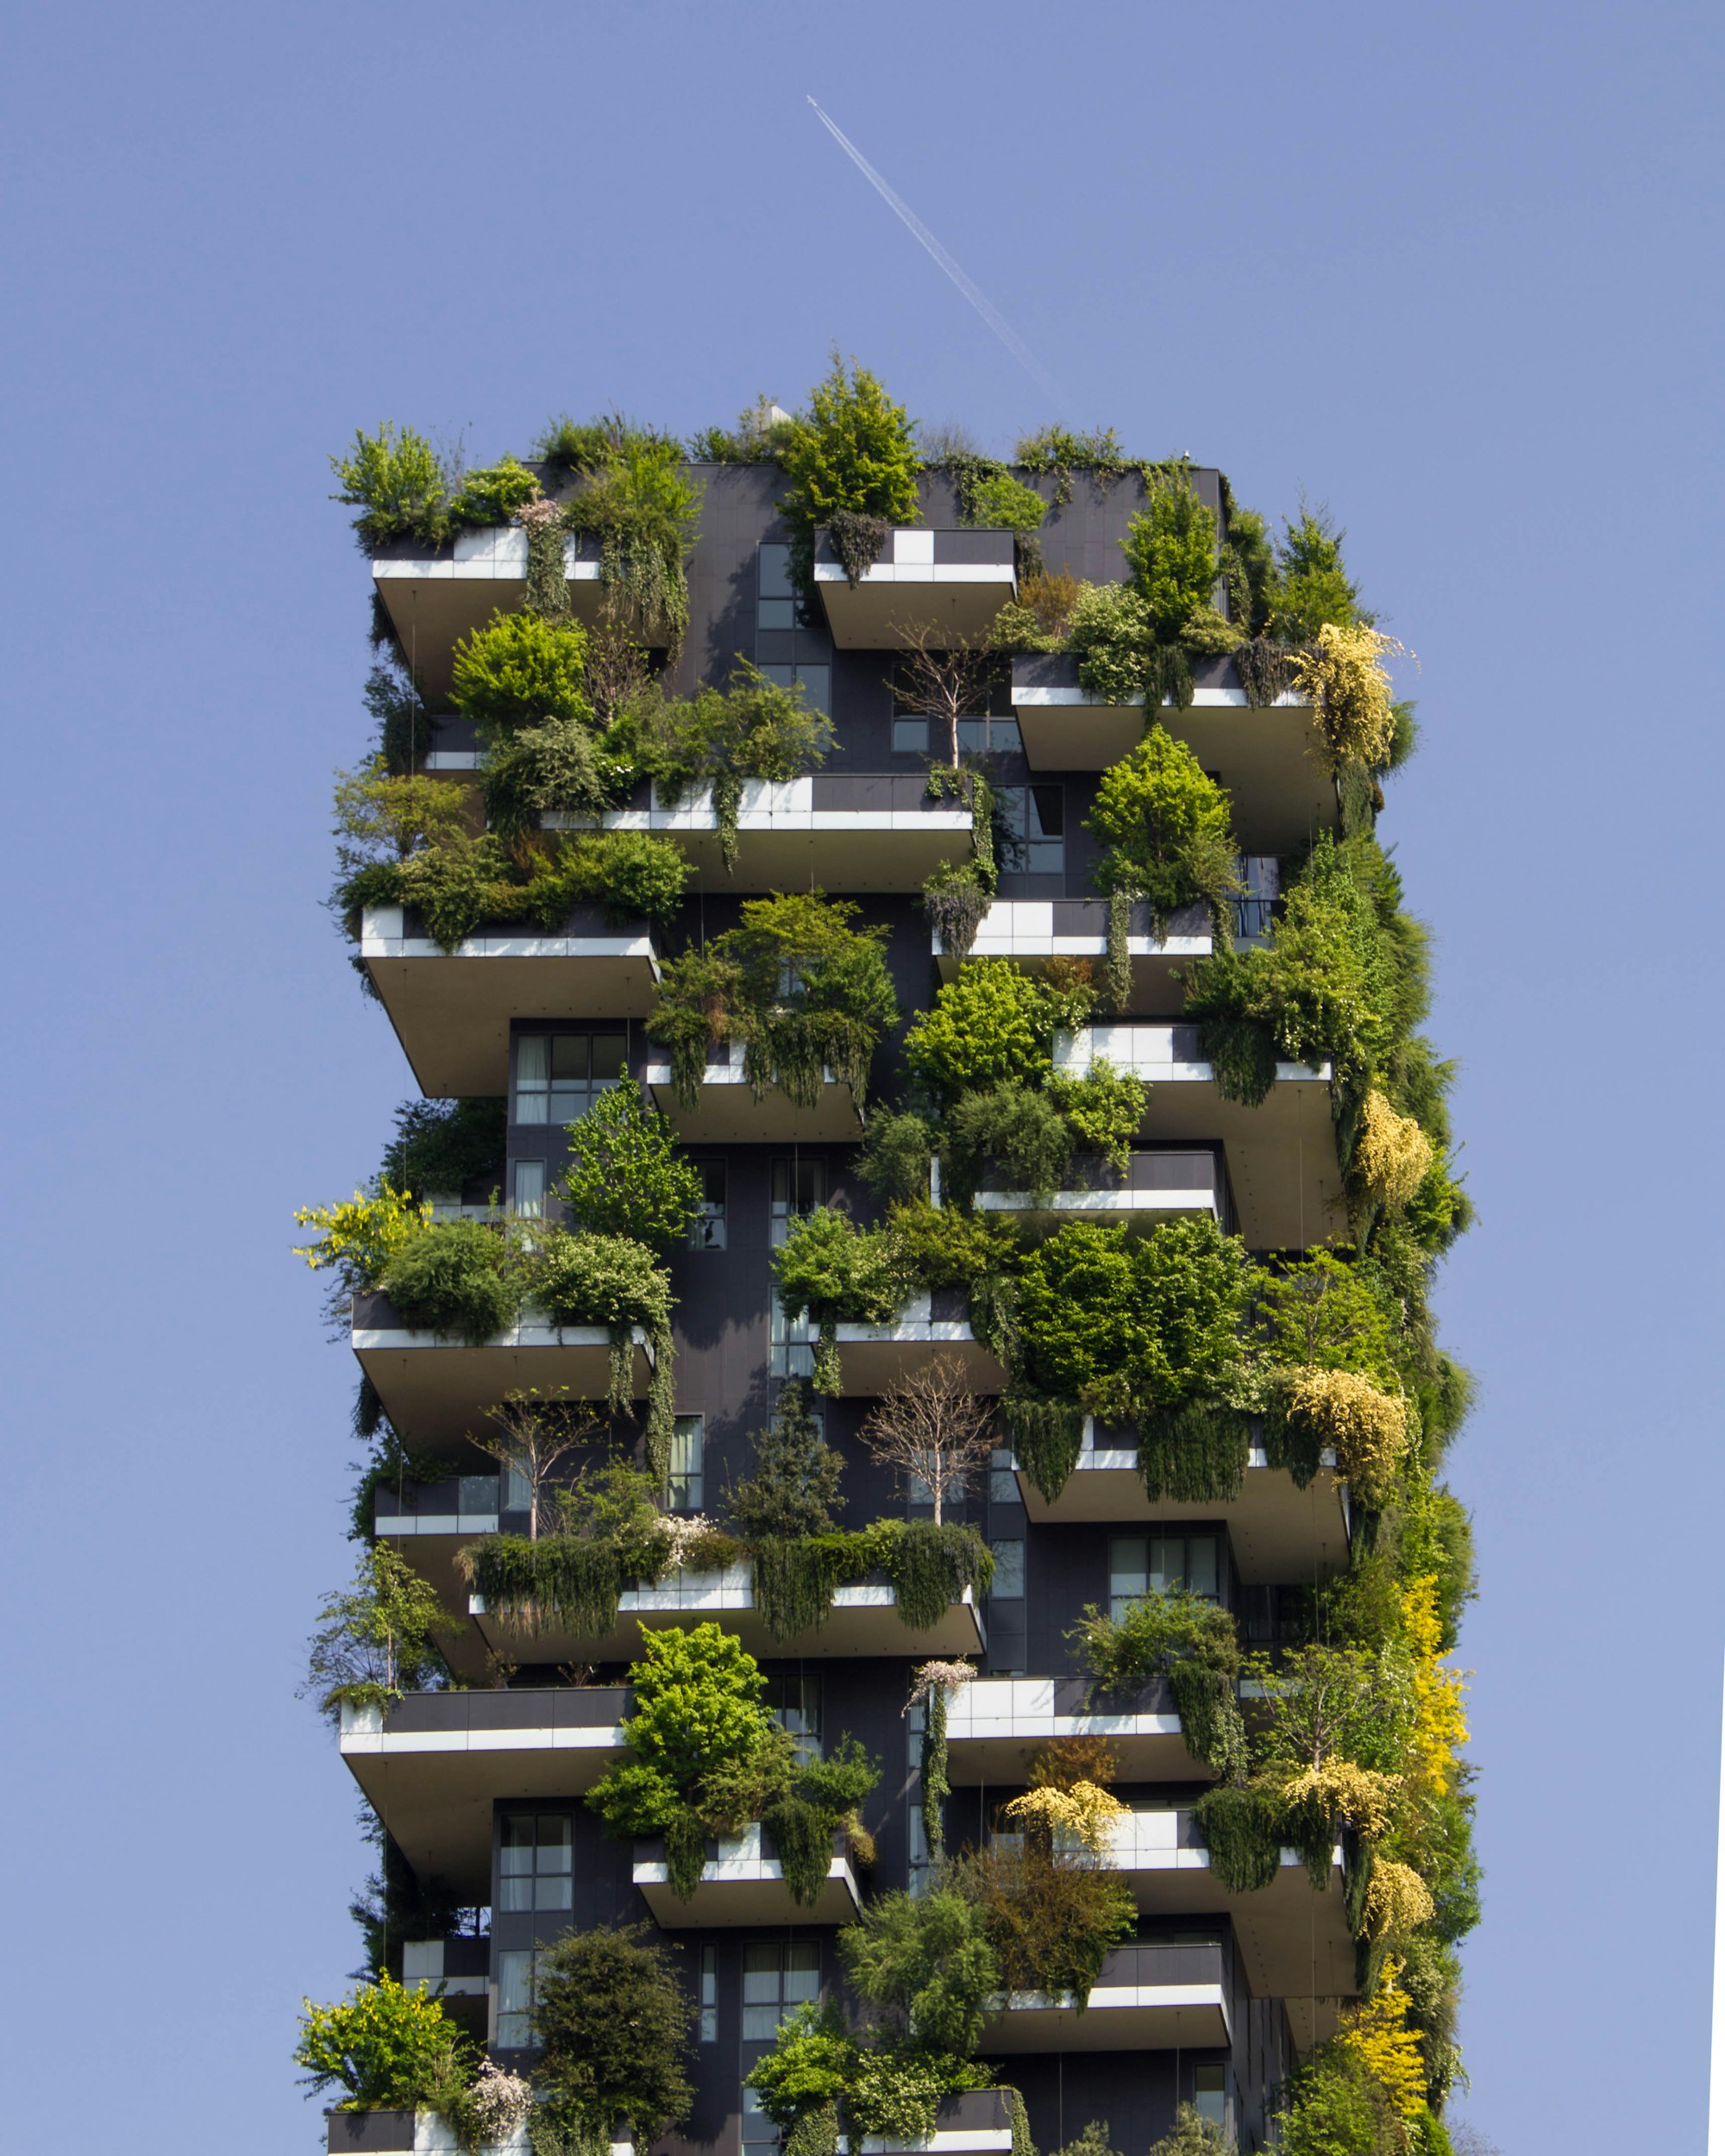 How can companies make environmentally friendly real estate choices?